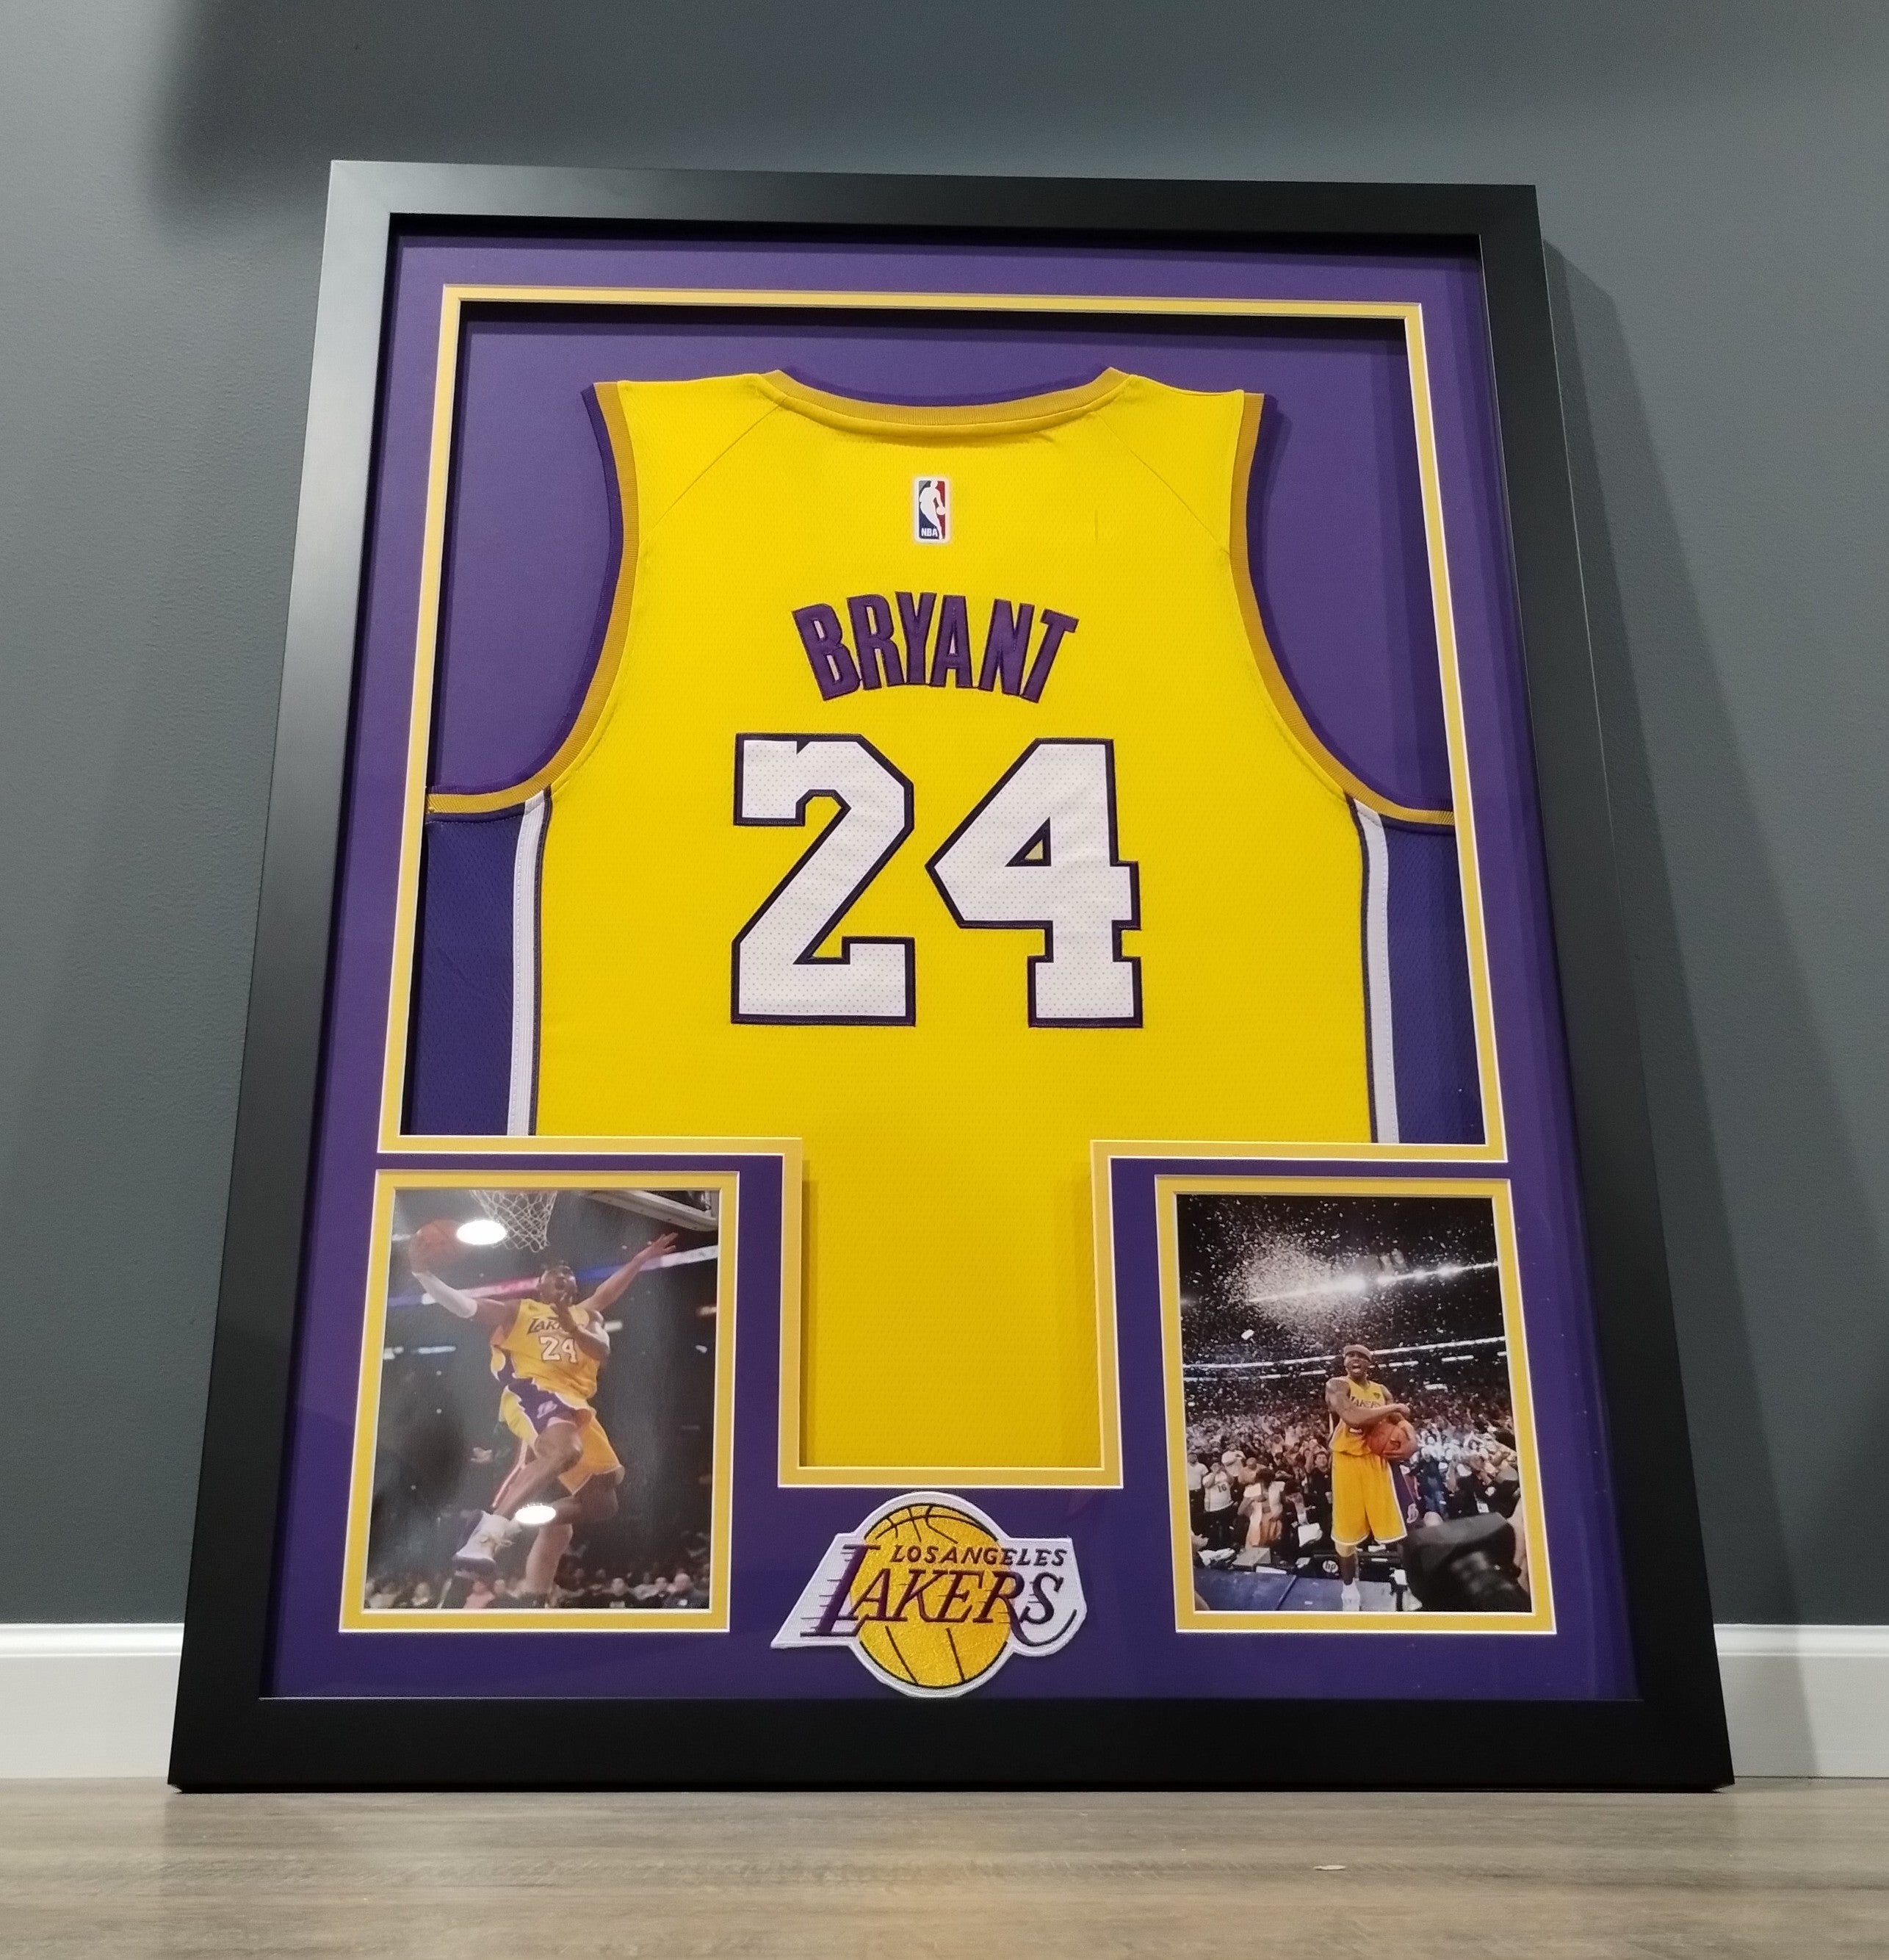 NBA Los Angeles Lakers Gold Authentic Jersey Kobe Bryant #24, X